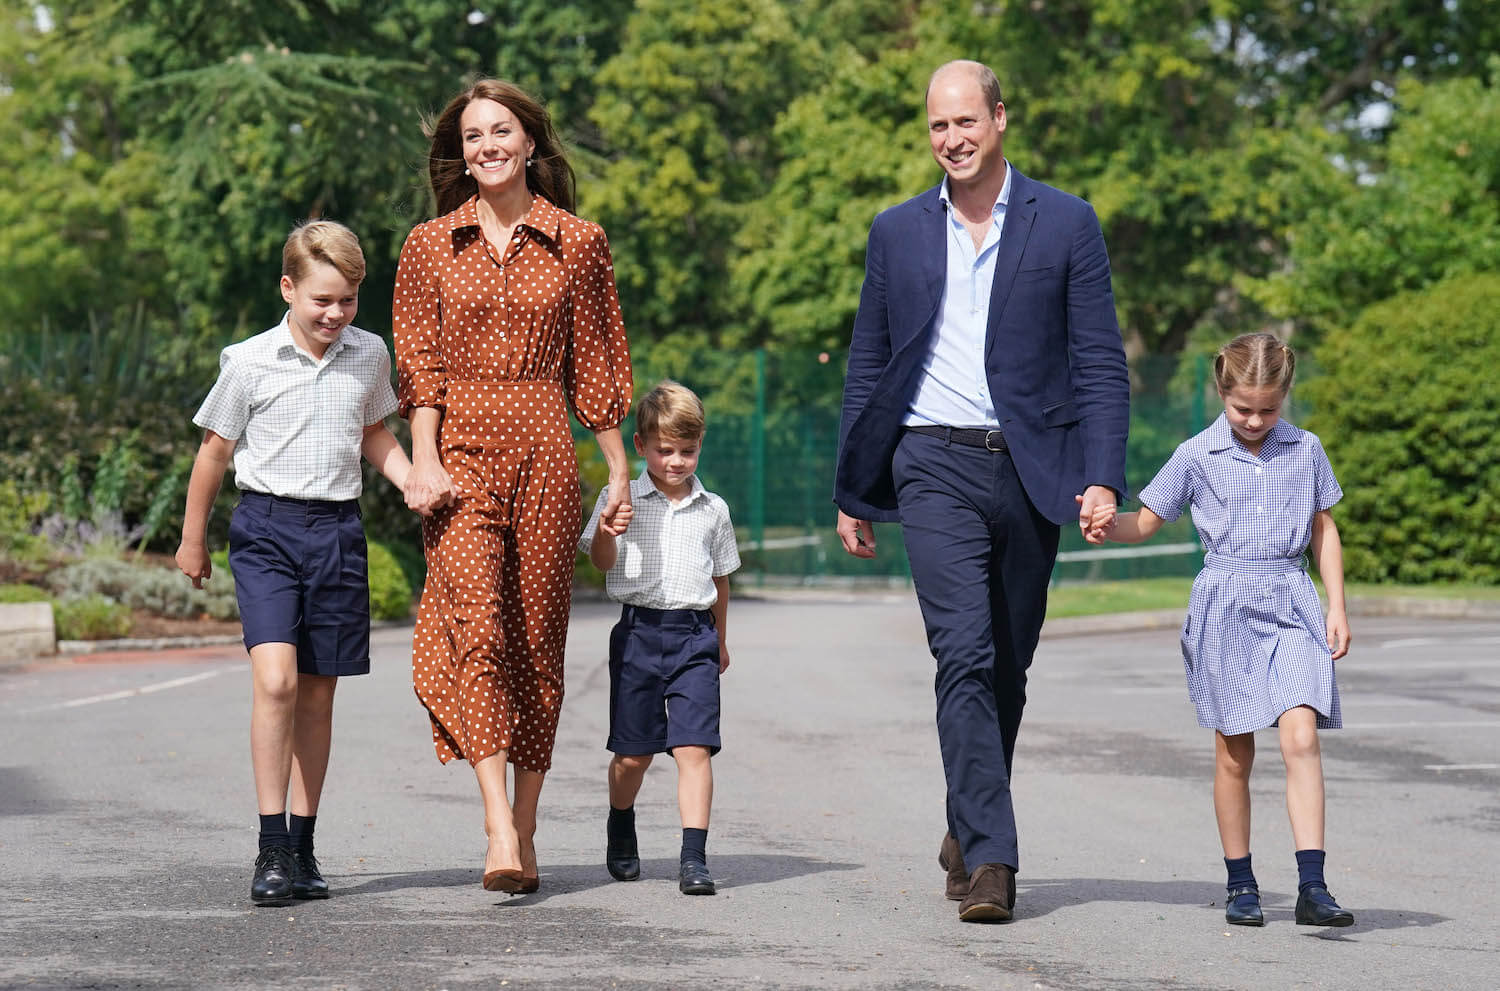 Prince William and Kate Middleton Are ‘Modern Parents’ Striving to Give Their Children ‘Normal’ Upbringing